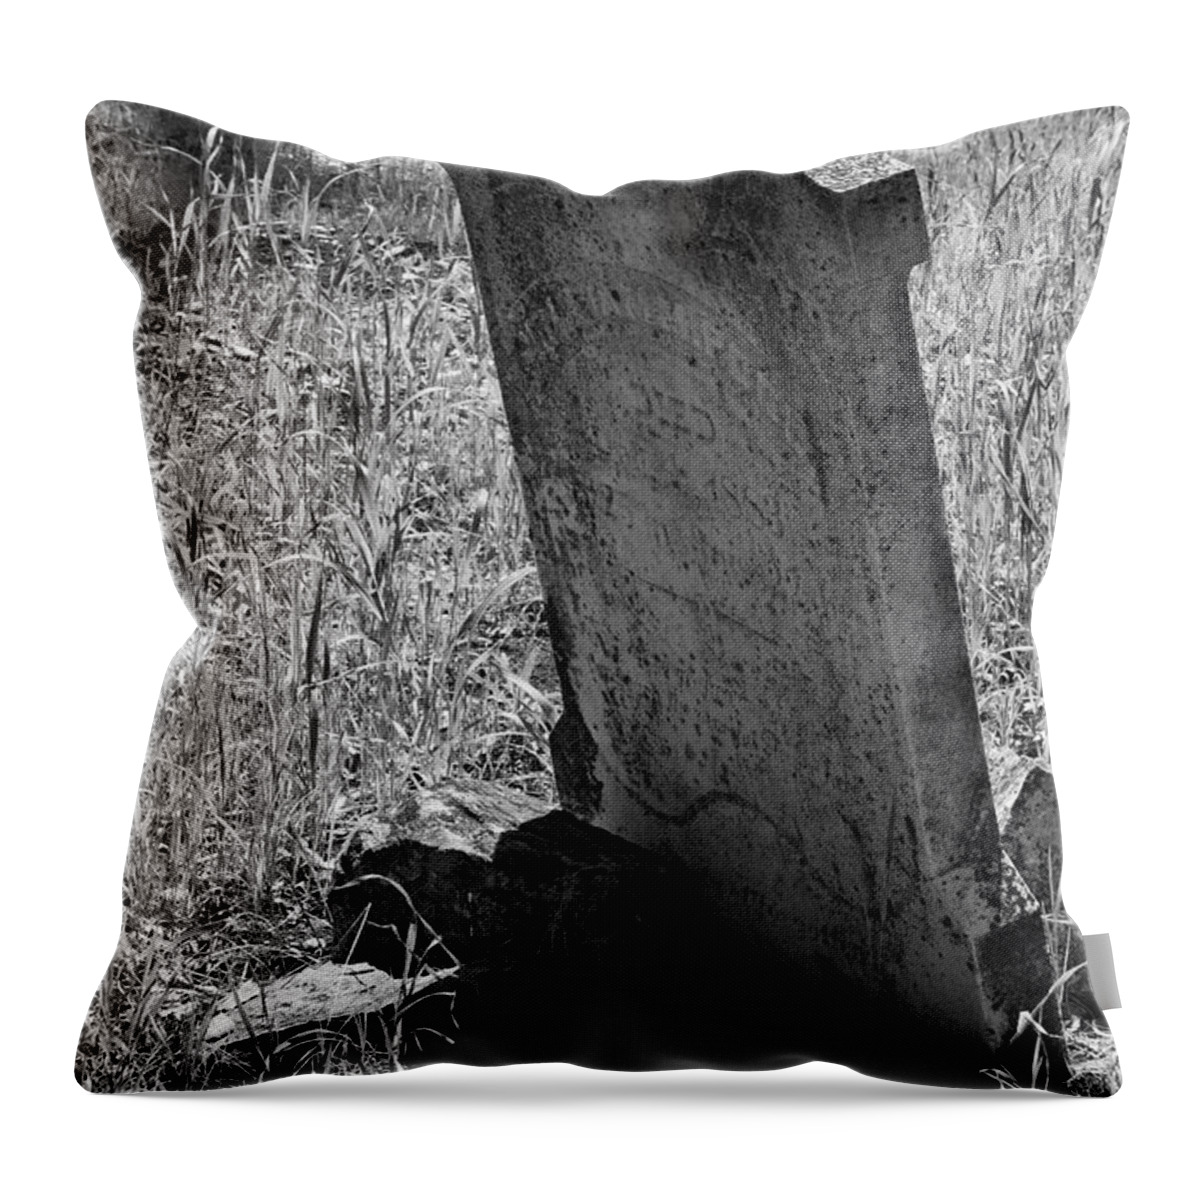 Cemetaries Throw Pillow featuring the photograph Headstone by Gina Cinardo